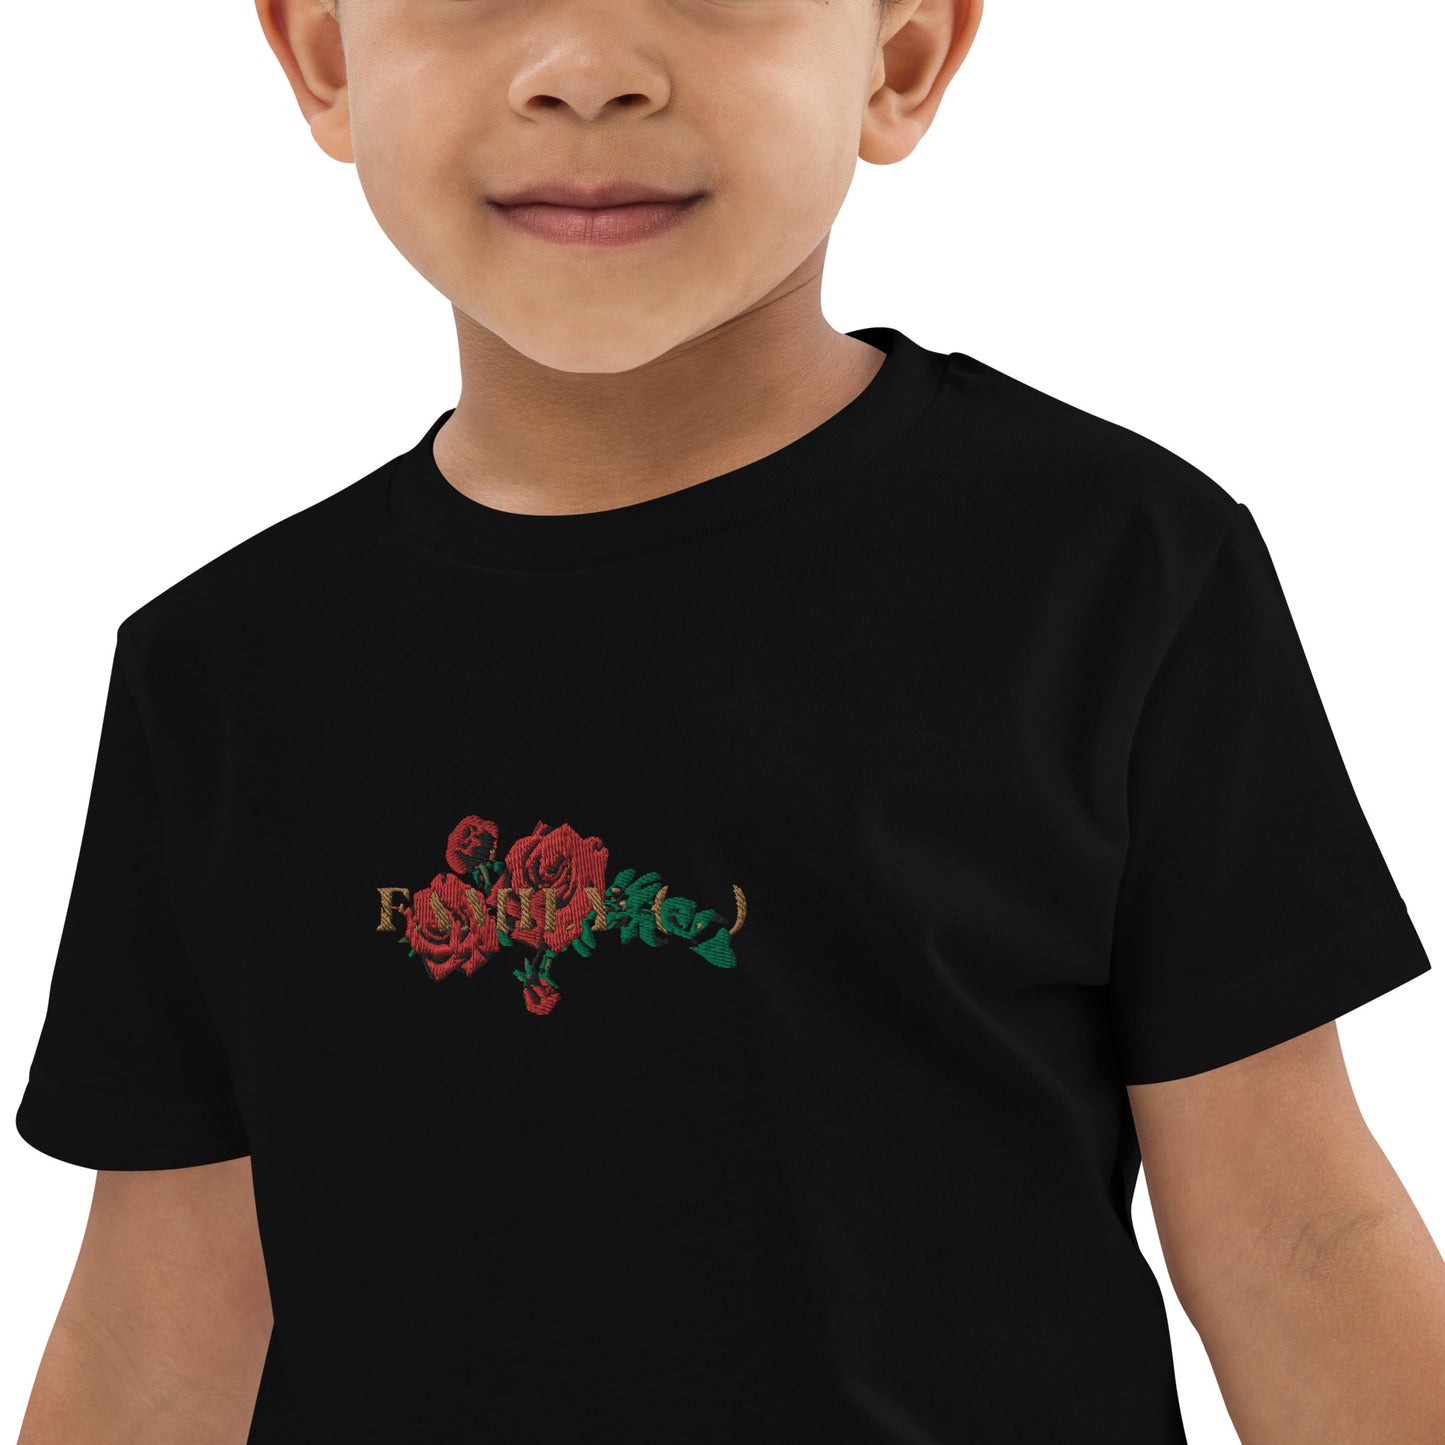 Give Them Their Flowers Kids Tee